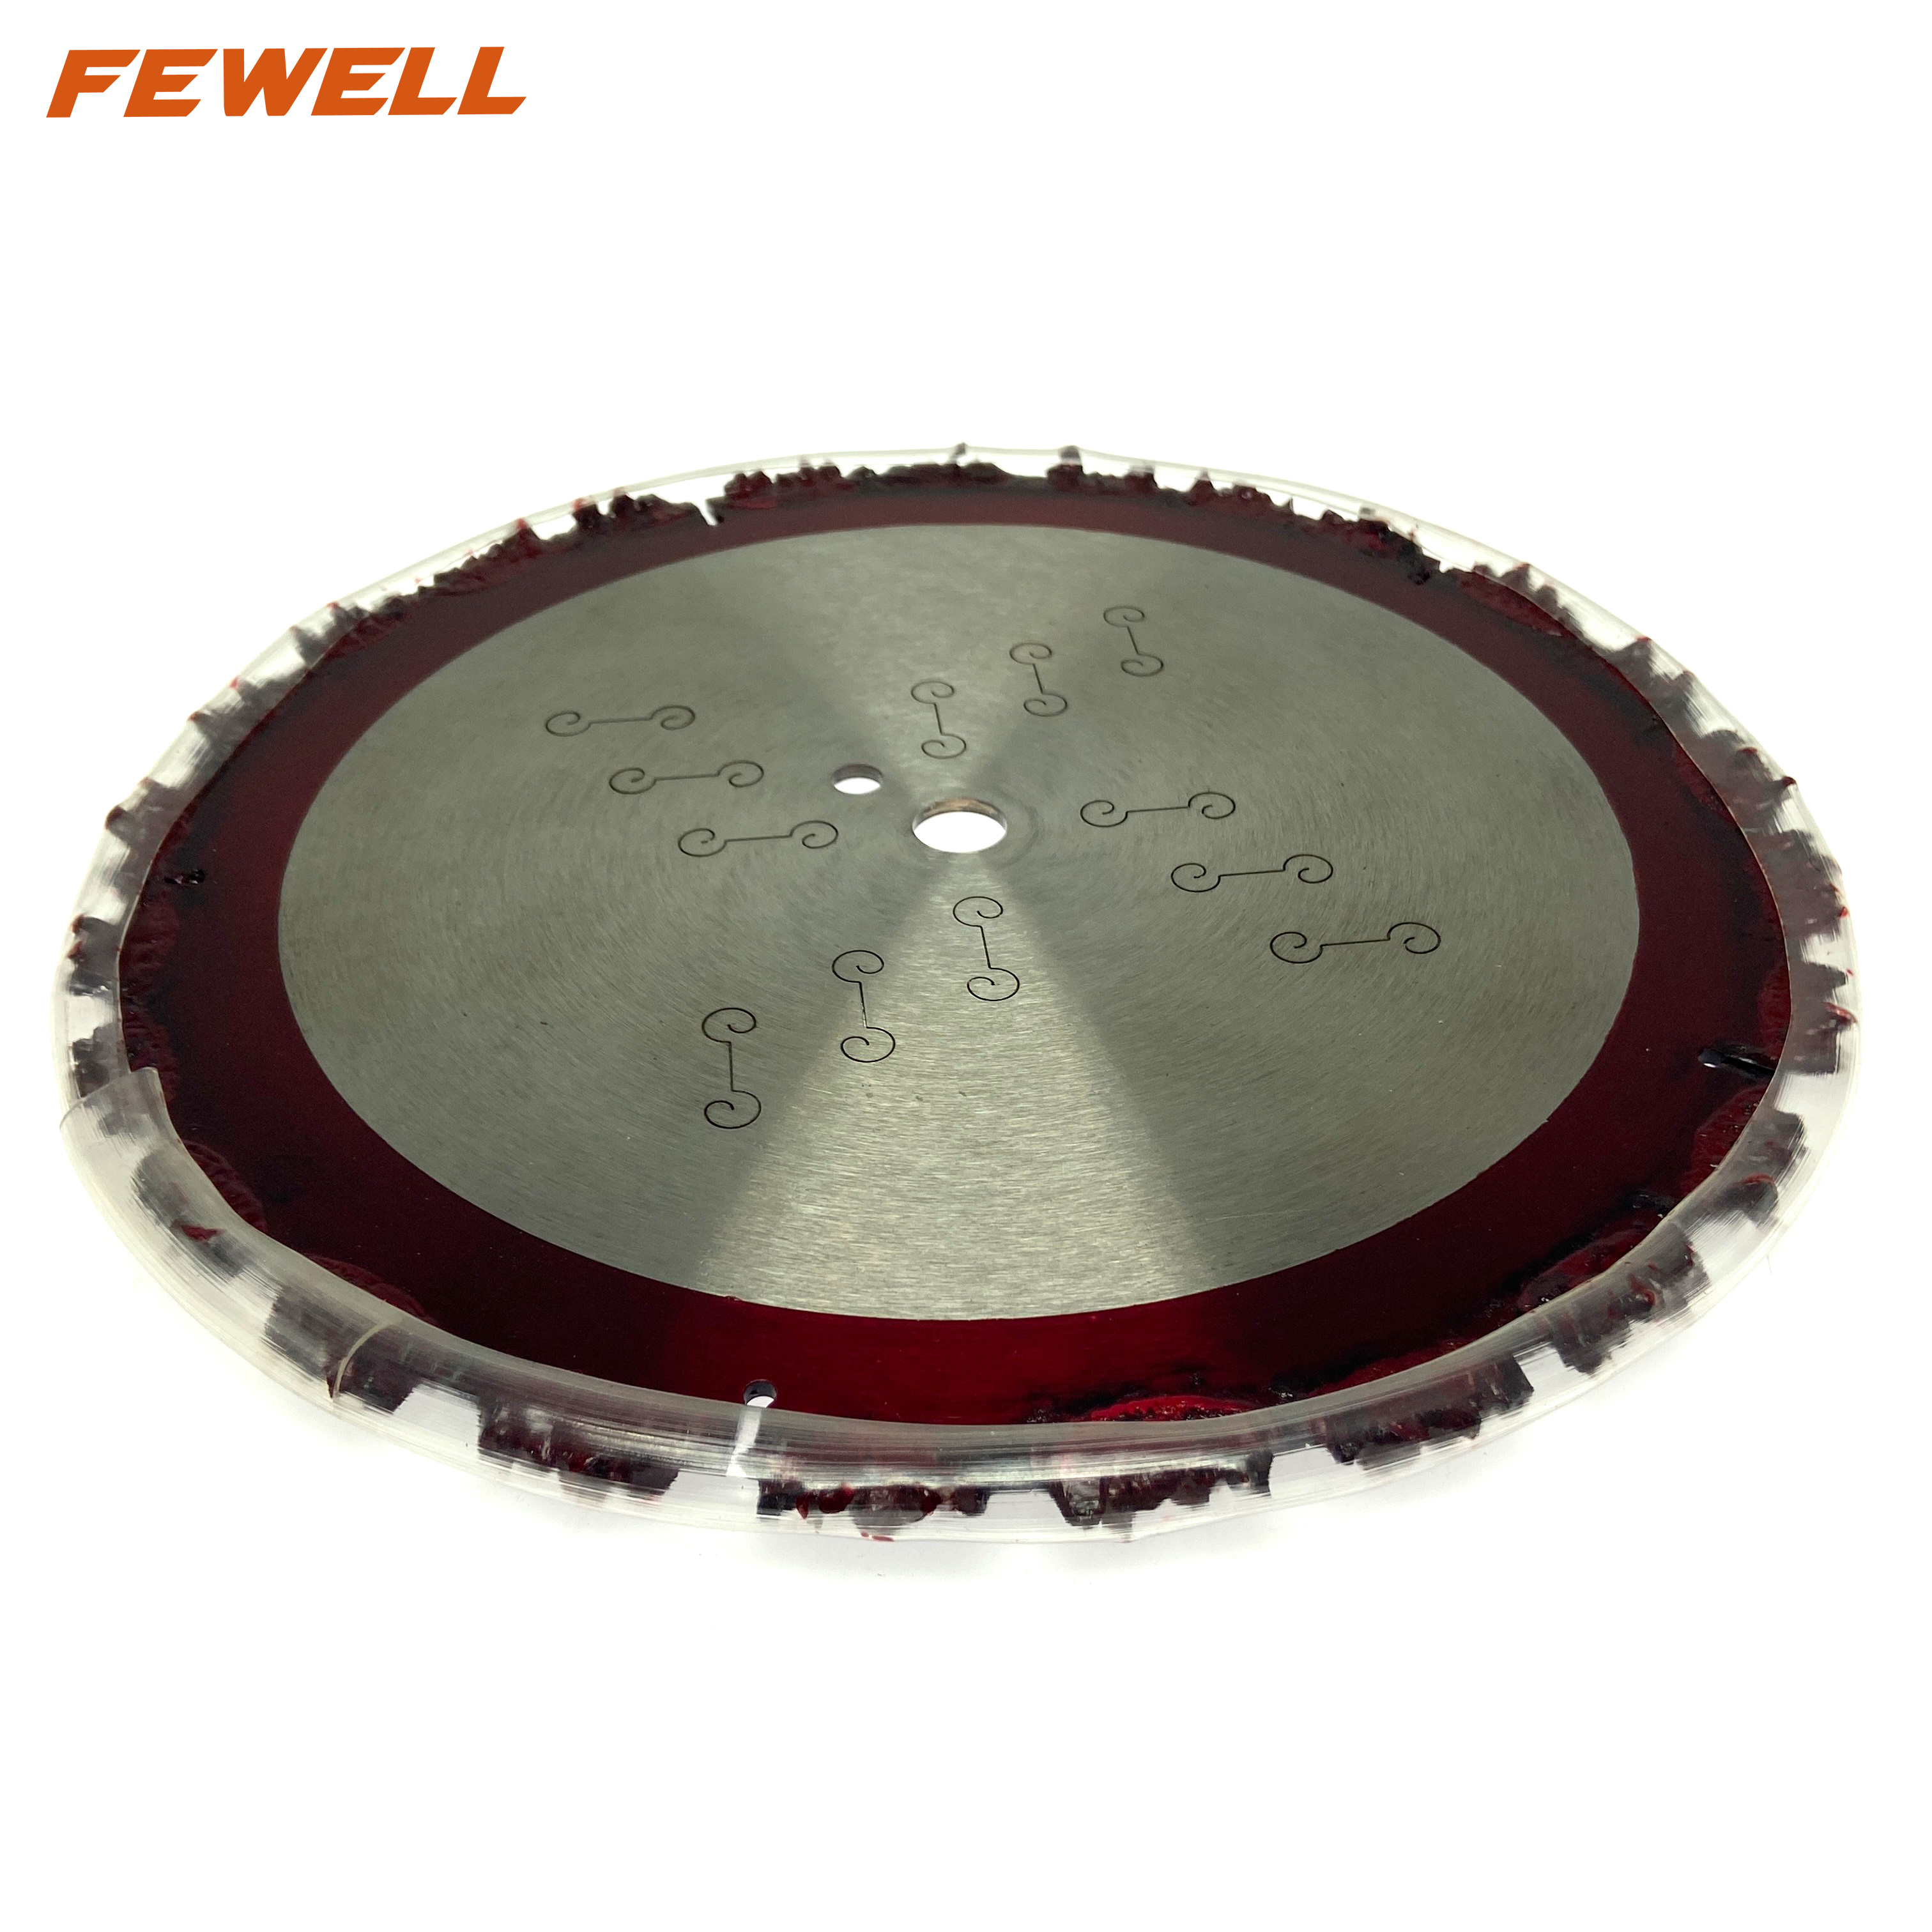 High quality 14inch Multifunction 350x25.4/20mm+pin hole Carbide cluster rescue saw blade with silent line for cutting concrete wood brick 